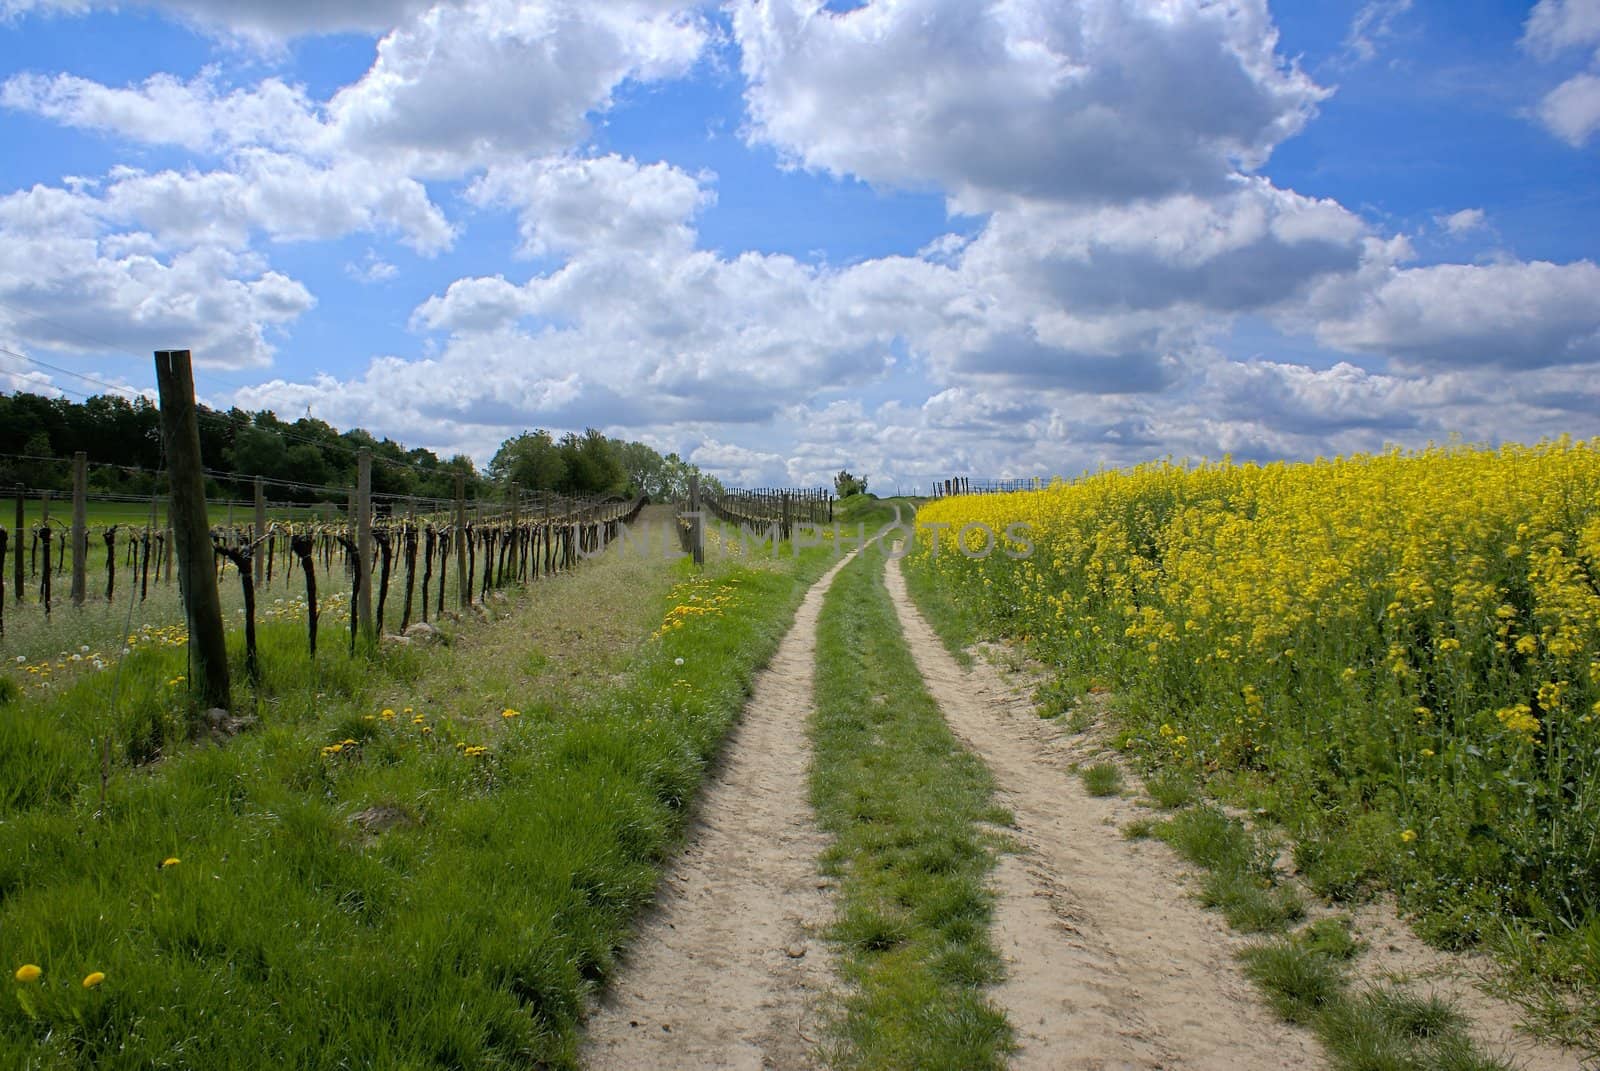 A scenic path surrounded by vineyards and rape fields.